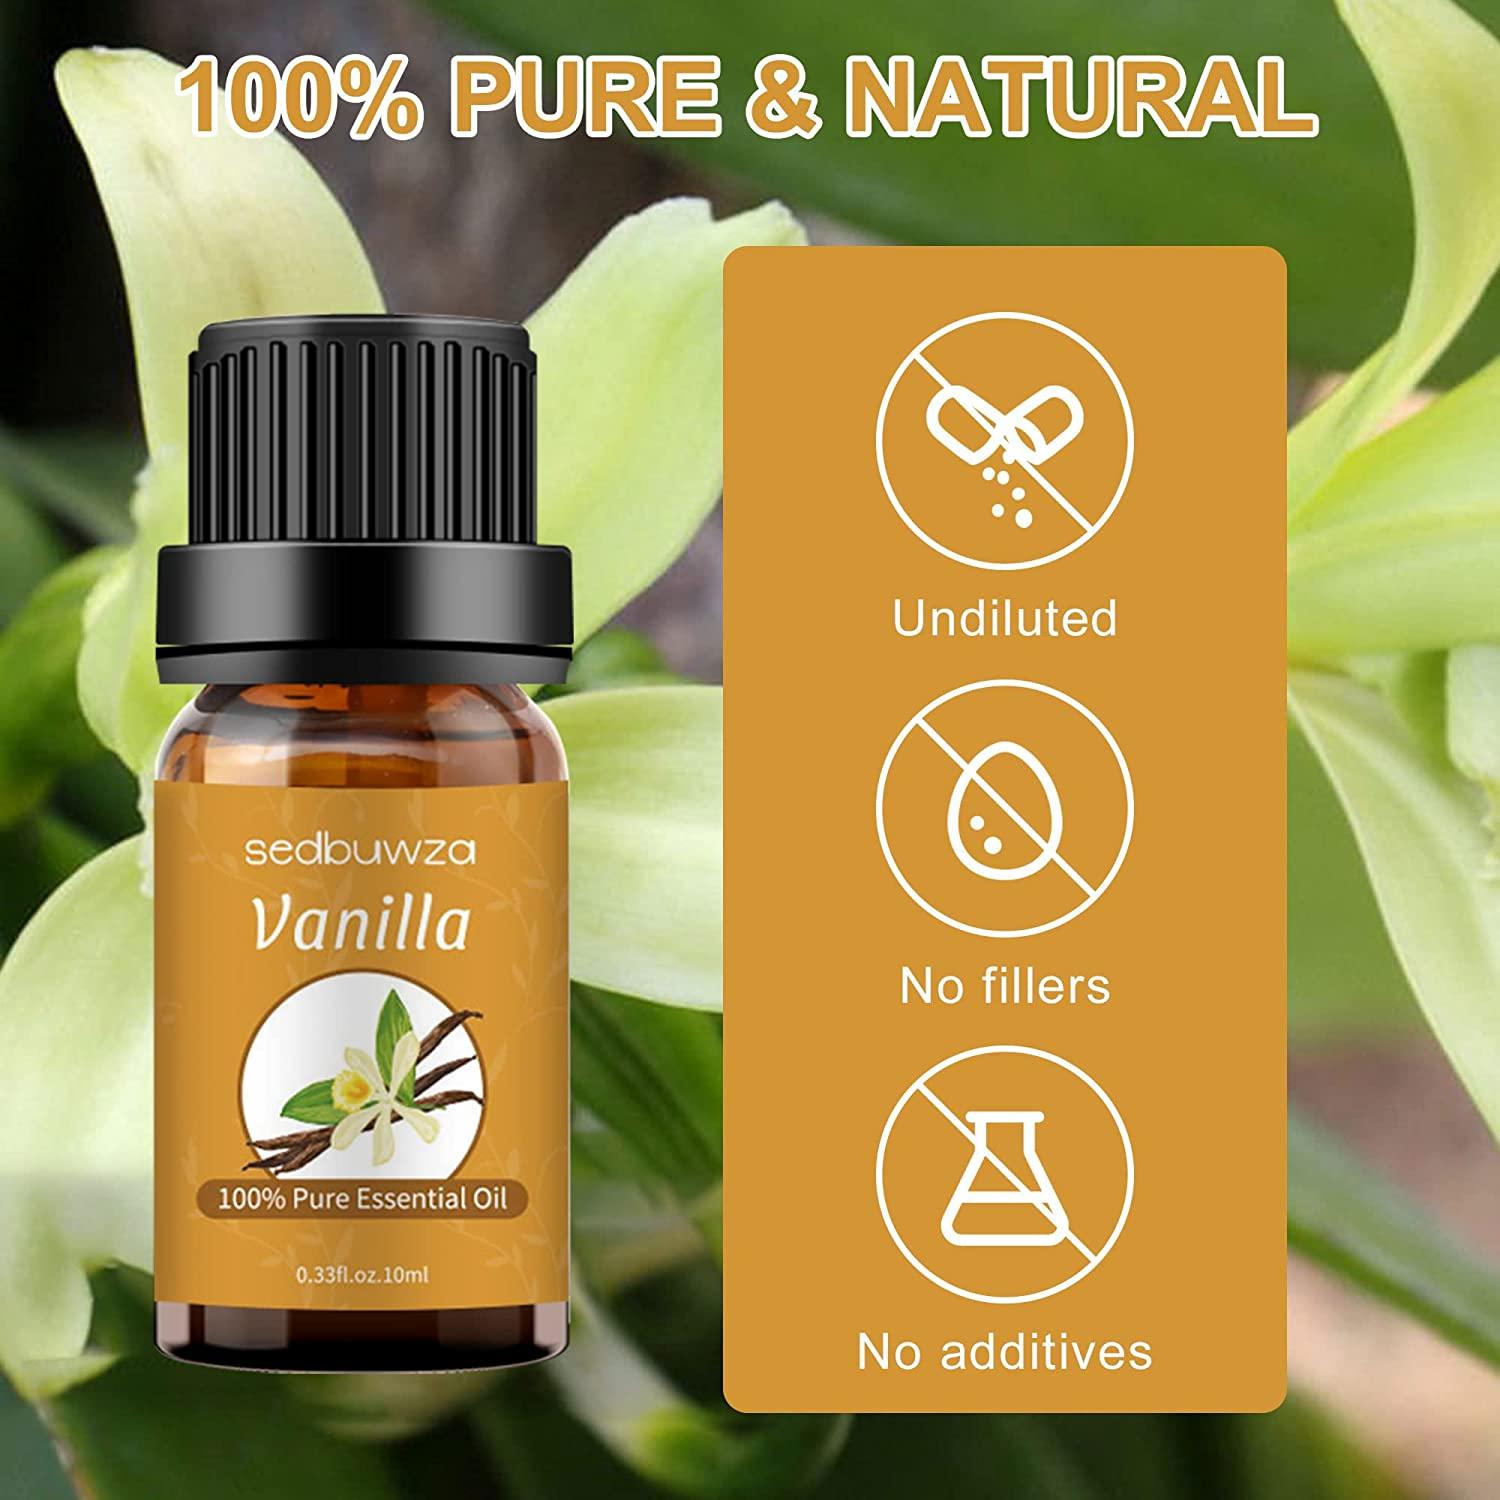 Vanilla Fragrance Oil 10 mL (1/3 Oz) Aromatherapy - 100% Pure Organic  Aromatic Premium Essential Scented Perfume Oil by Sponix Made in USA 